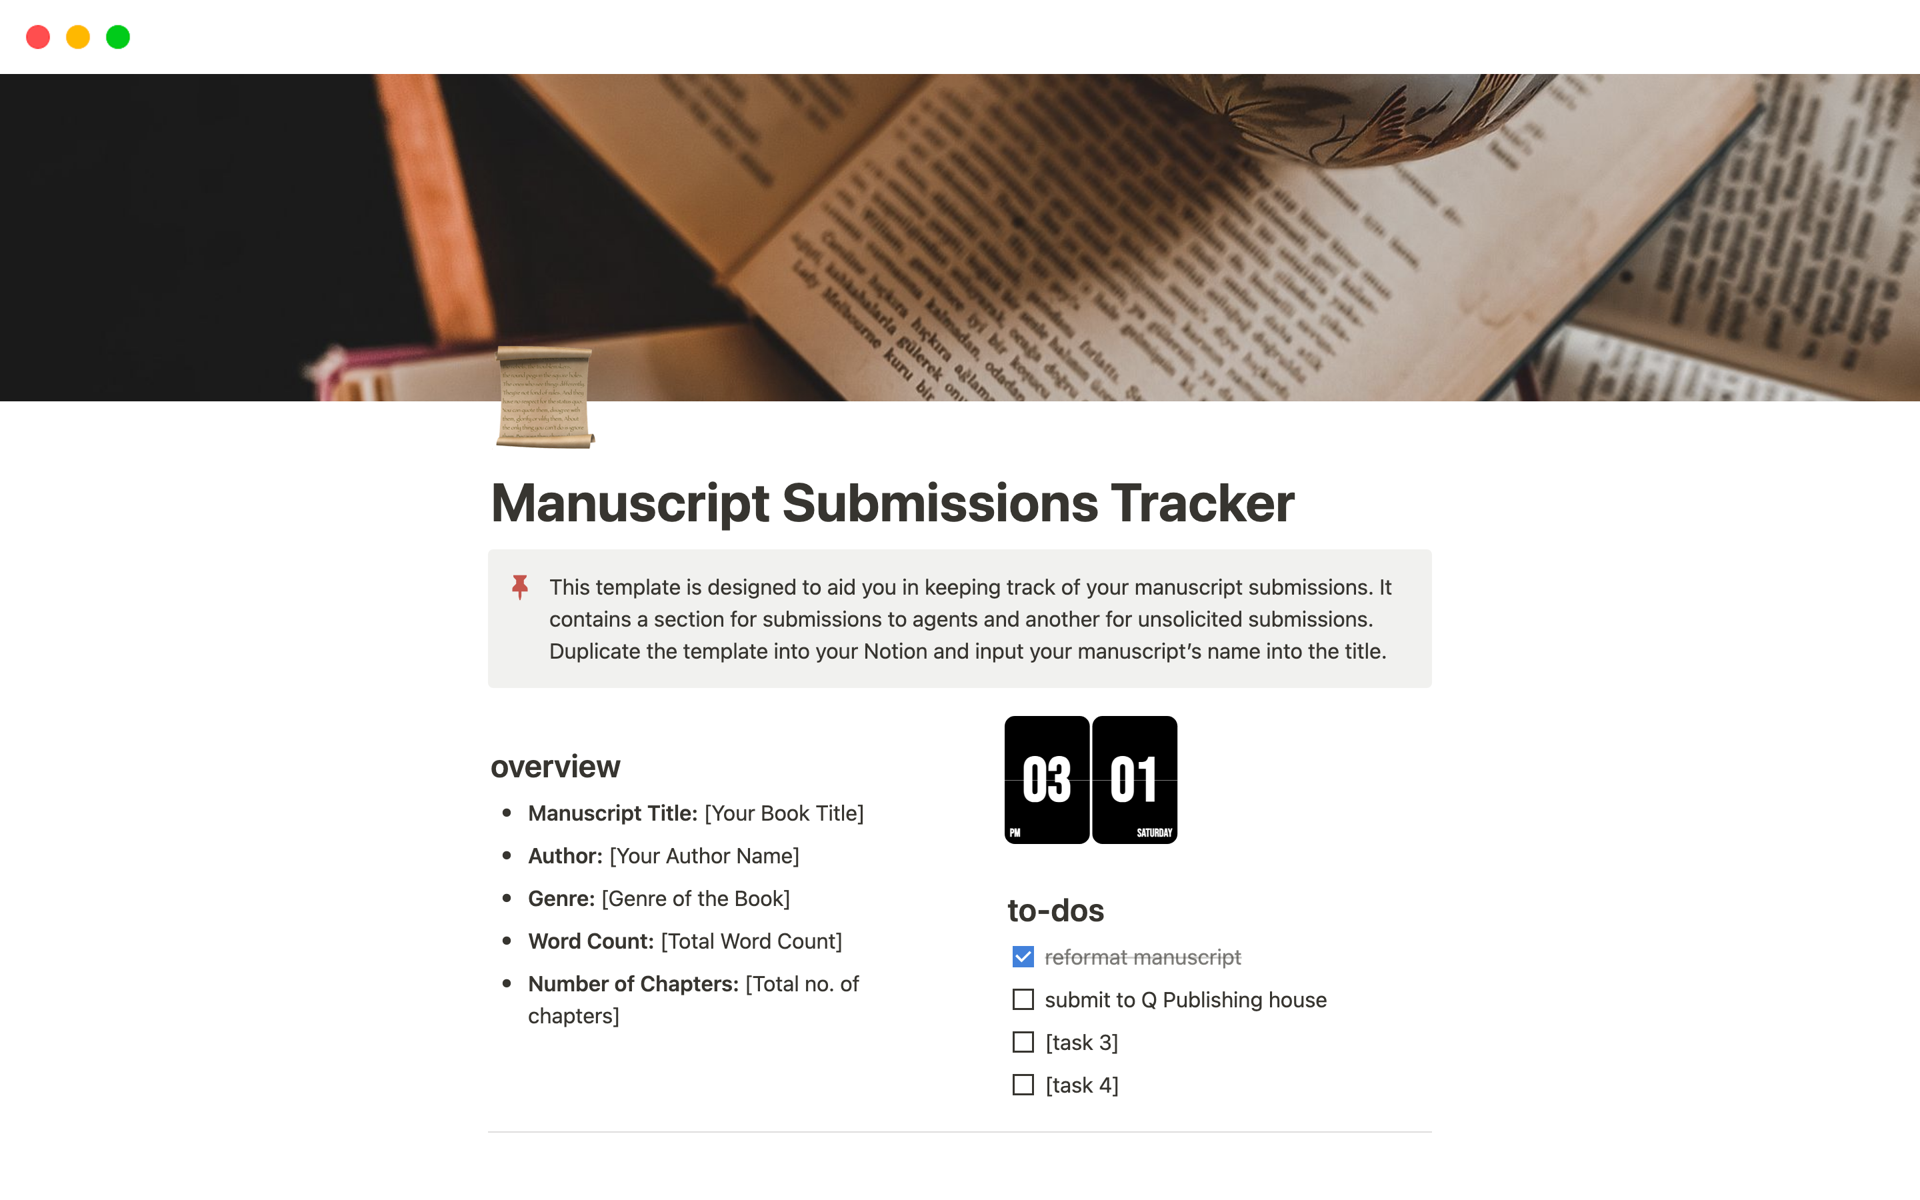 This template is designed to assist authors in keeping track of their manuscript submissions, ensuring that the submission process is streamlined and organized. 